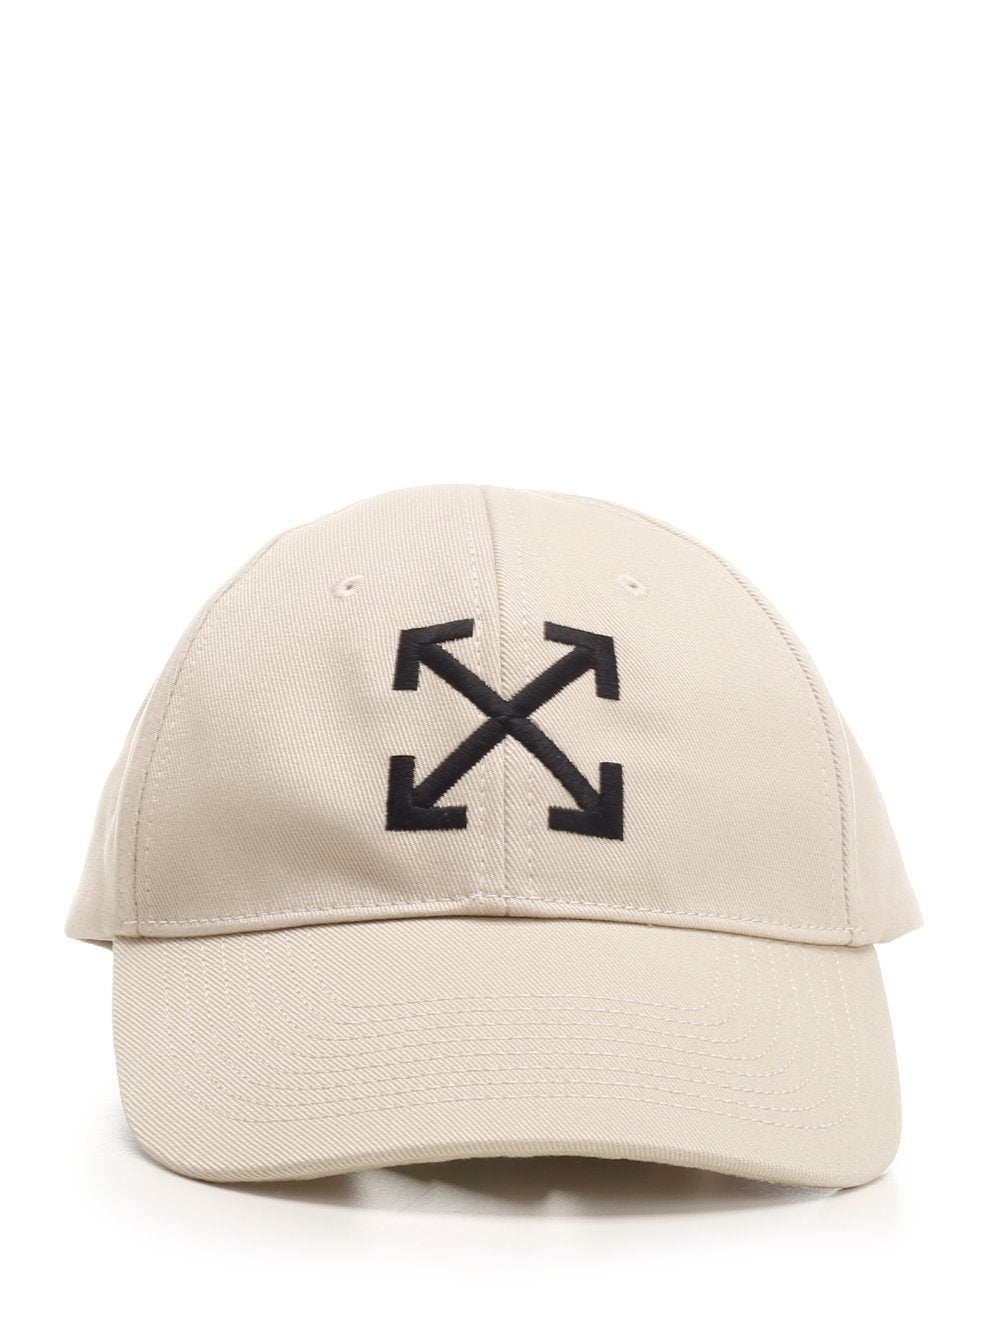 Off-White Arrows Embroidered Baseball Cap